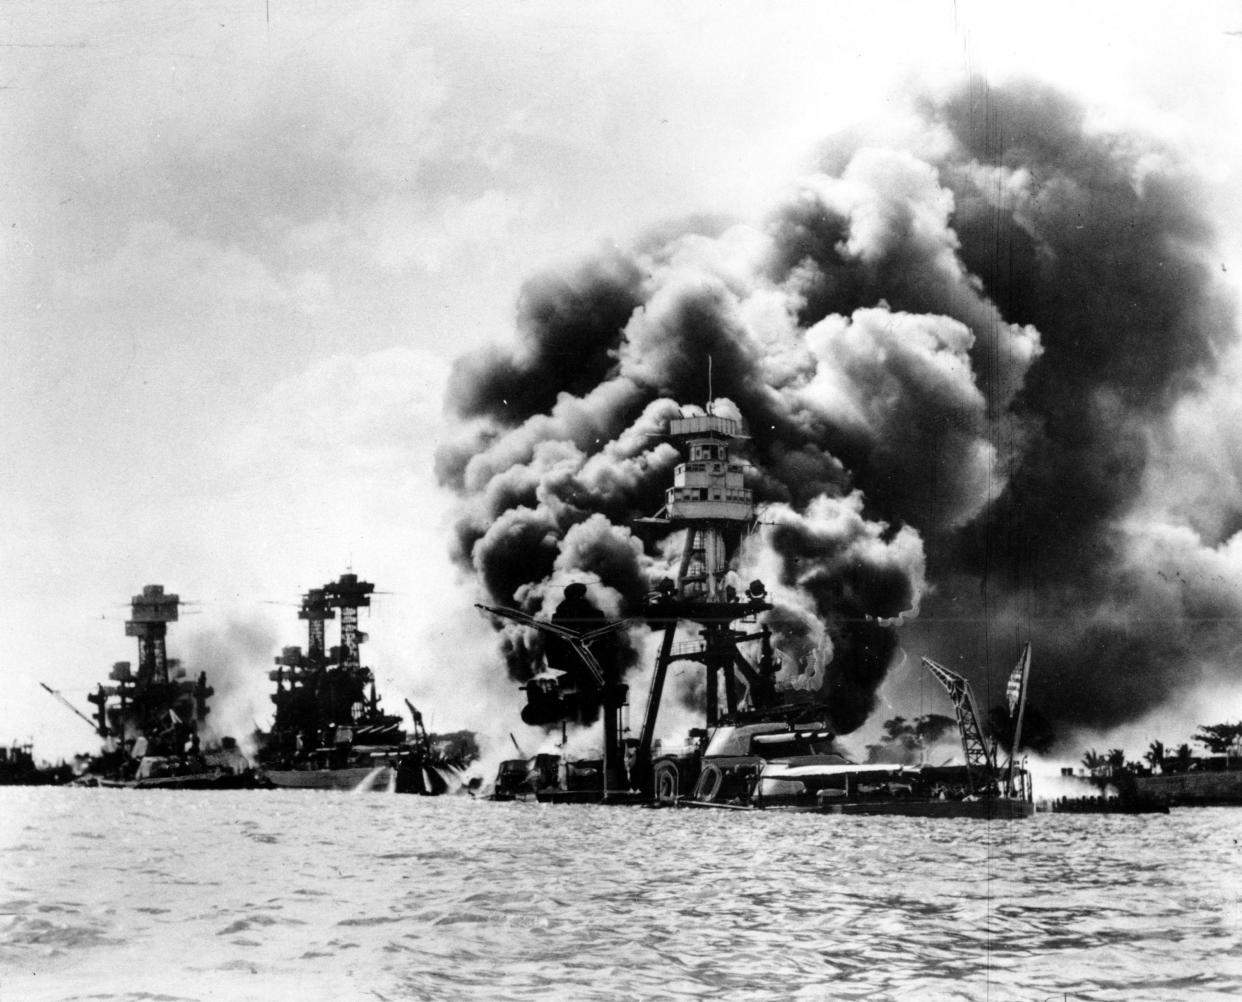 Three U.S. battleships are hit from the air during the Japanese attack on Pearl Harbor on Dec. 7, 1941. Japan's bombing of U.S. military bases at Pearl Harbor brings the U.S. into World War II. From left are: USS West Virginia, severely damaged; USS Tennessee, damaged; and USS Arizona, sunk.